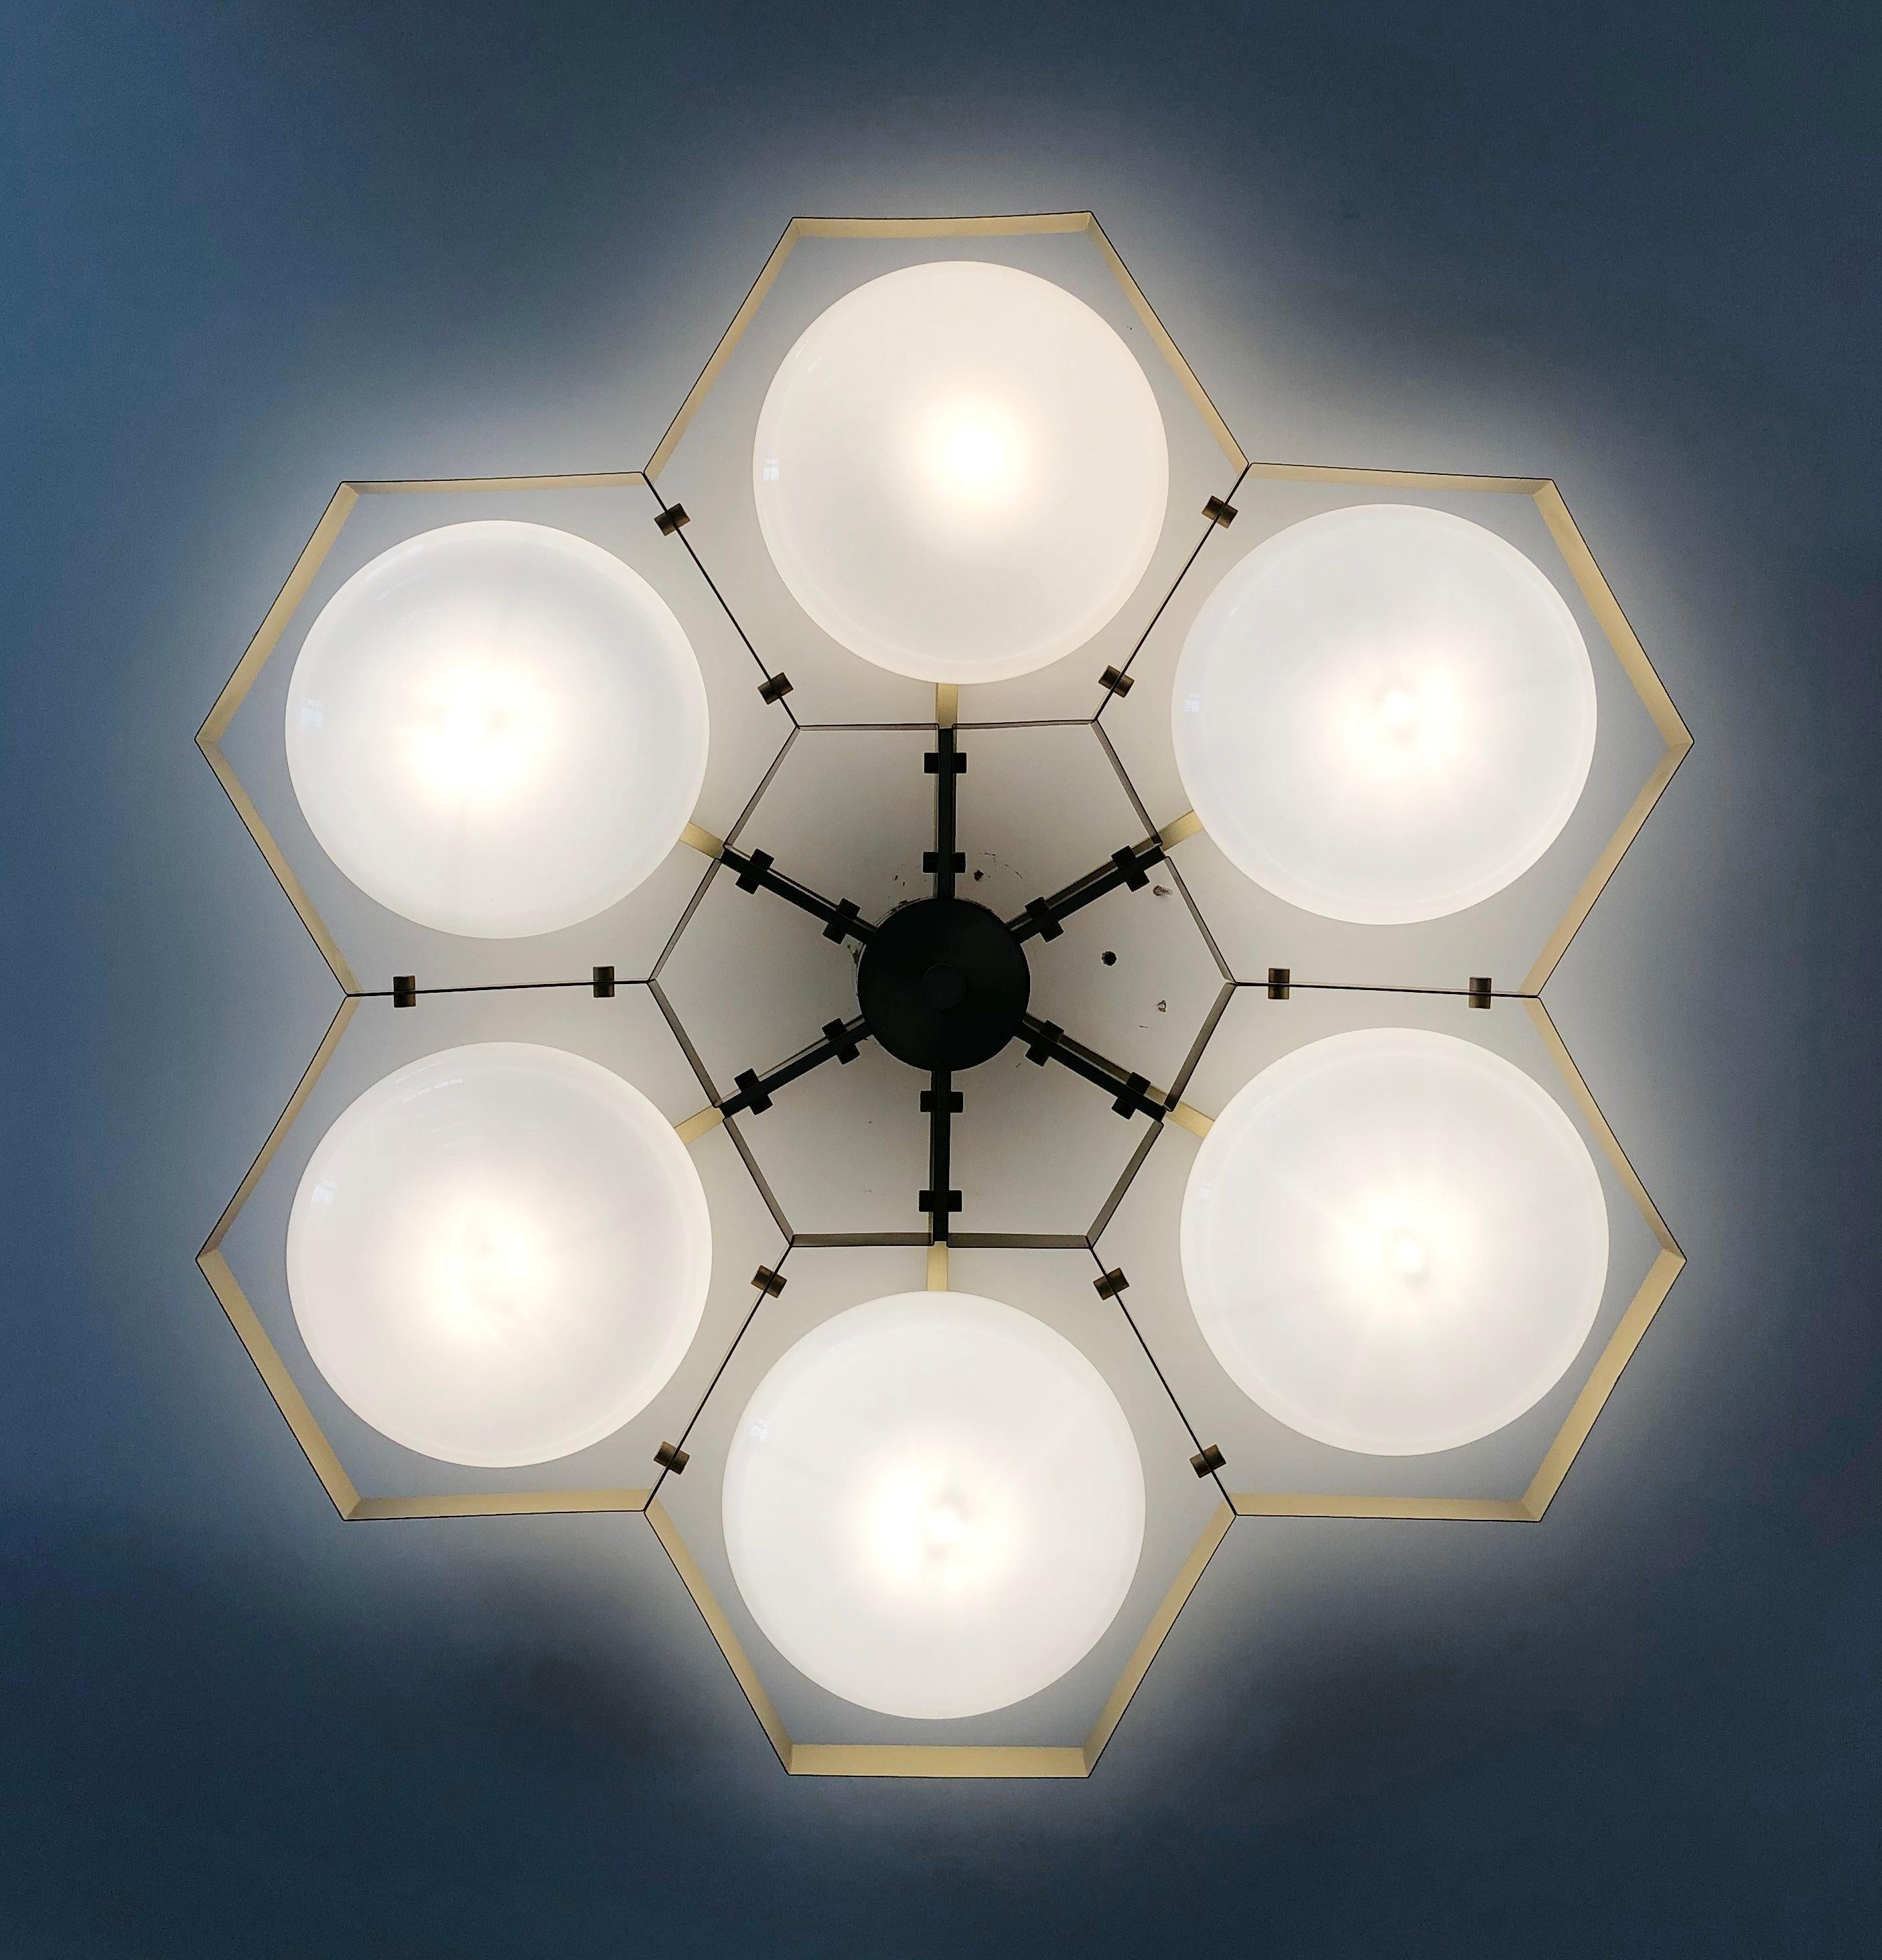 Italian flush mount with Murano glass shades mounted on solid brass frame / Made in Italy
Designed by Fabio Ltd, inspired by Angelo Lelli and Arredoluce styles
6 lights / E12 or E14 / max 40W each
Measures: Diameter 43 inches / height 10